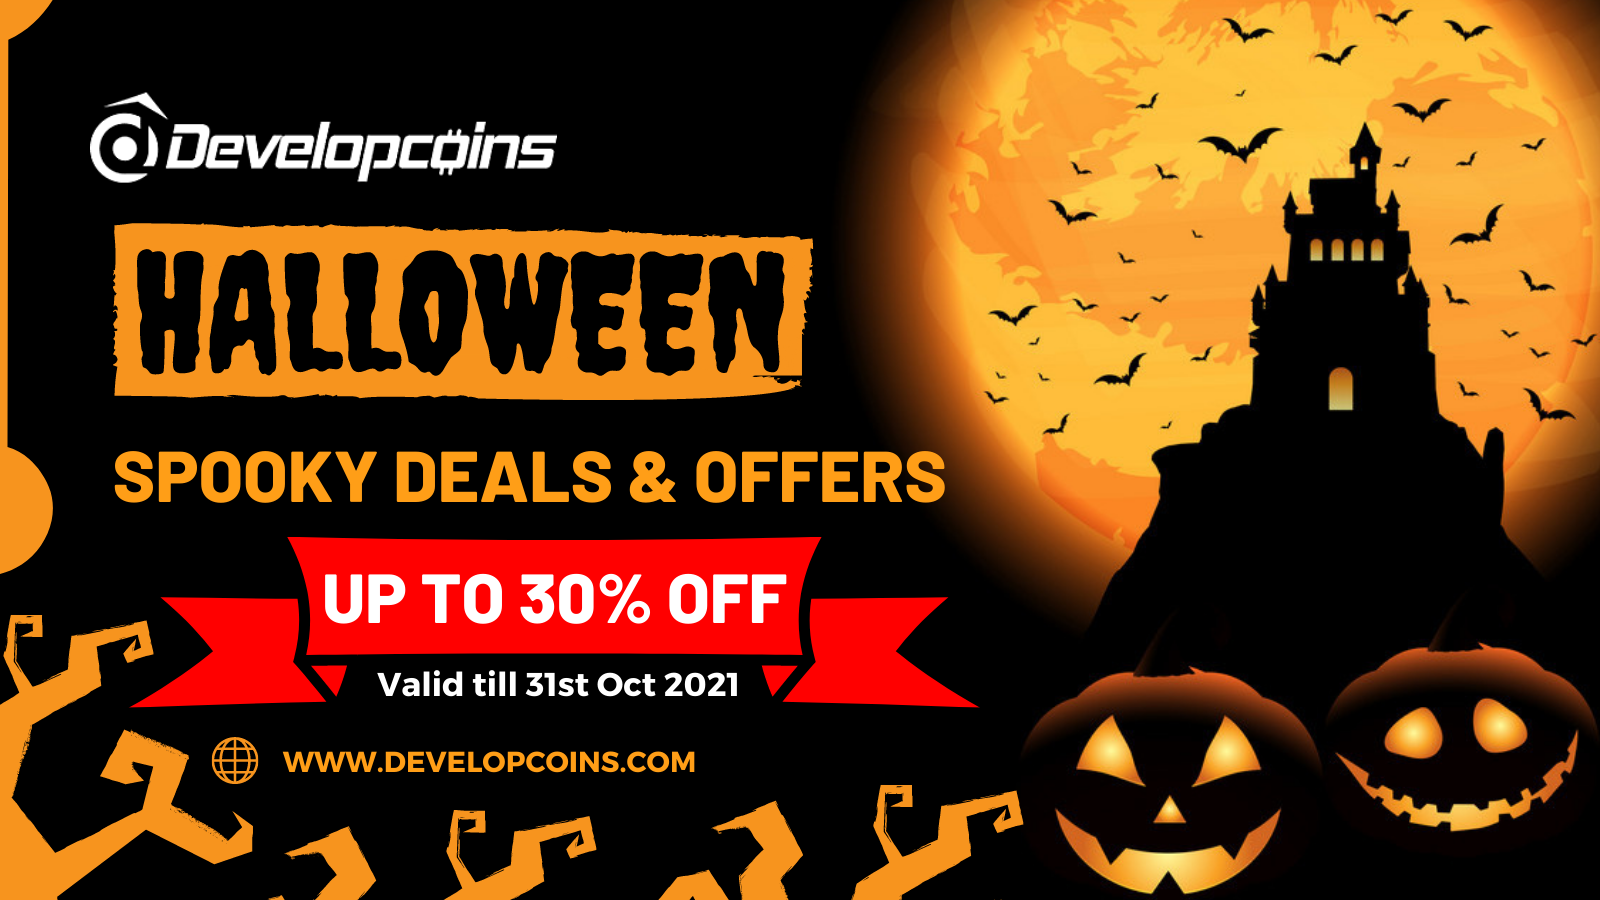 Top Halloween Deals 2021 : Up To 30% OFF On Services from Developcoins